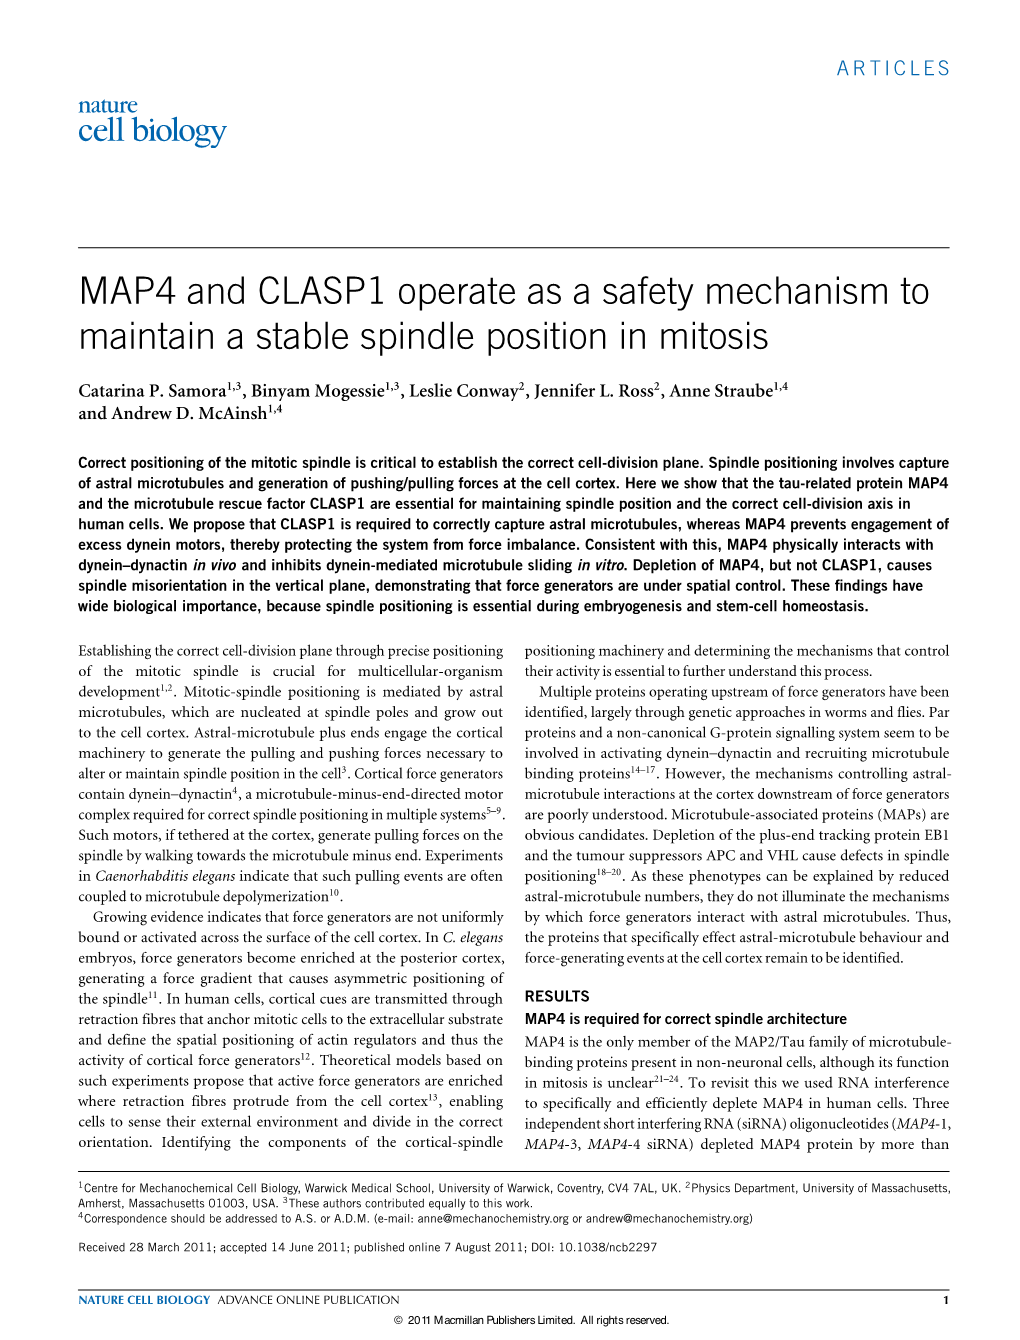 MAP4 and CLASP1 Operate As a Safety Mechanism to Maintain a Stable Spindle Position in Mitosis